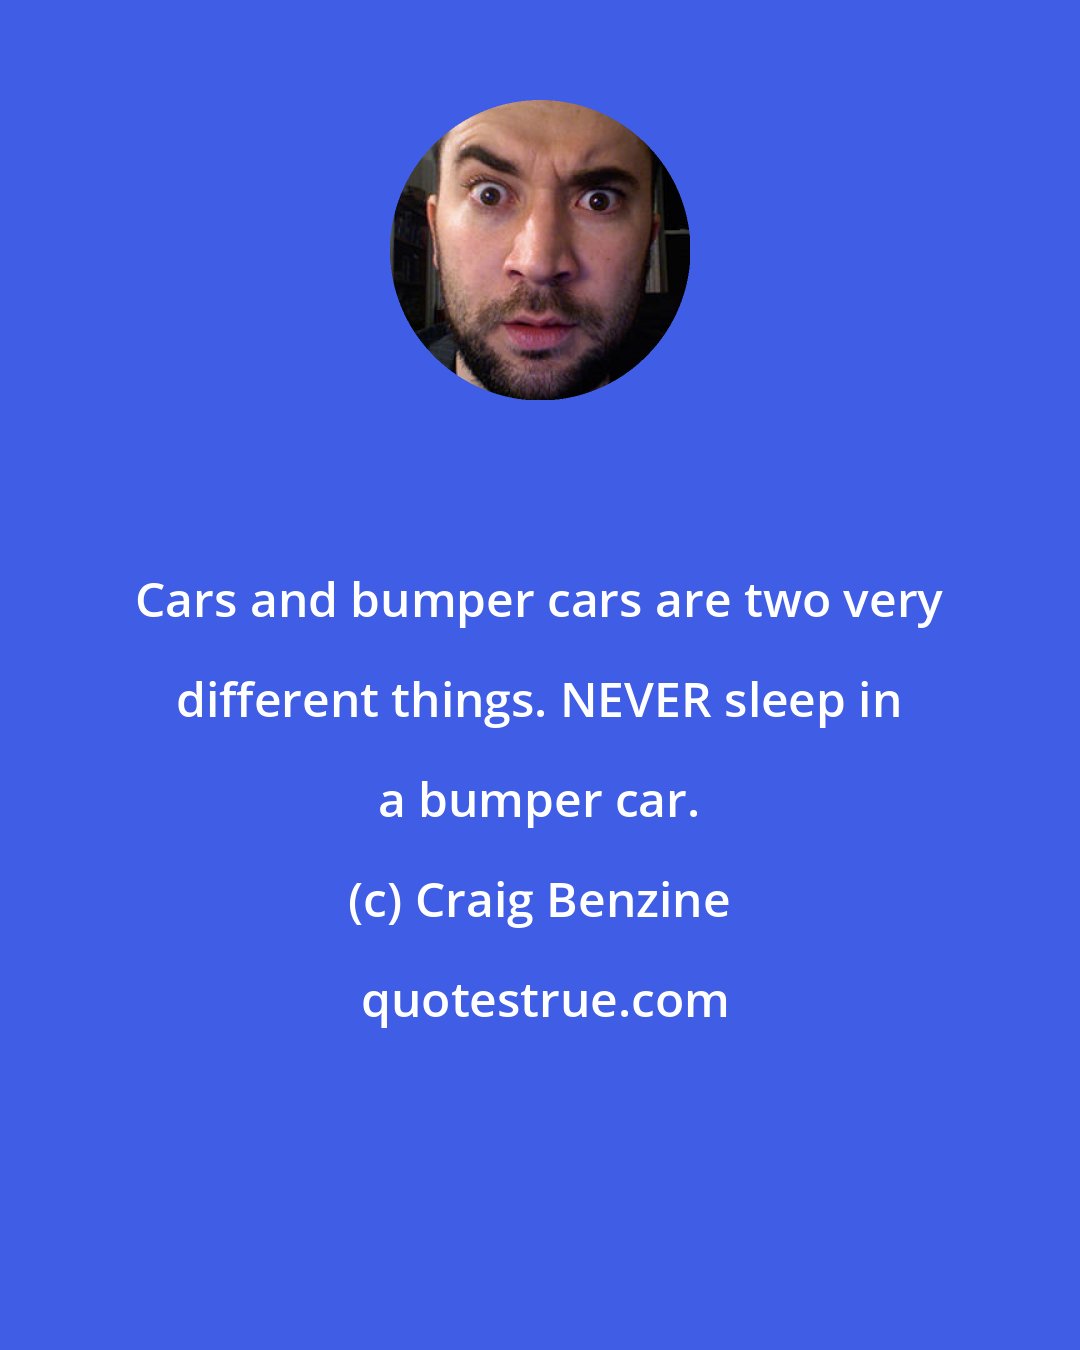 Craig Benzine: Cars and bumper cars are two very different things. NEVER sleep in a bumper car.